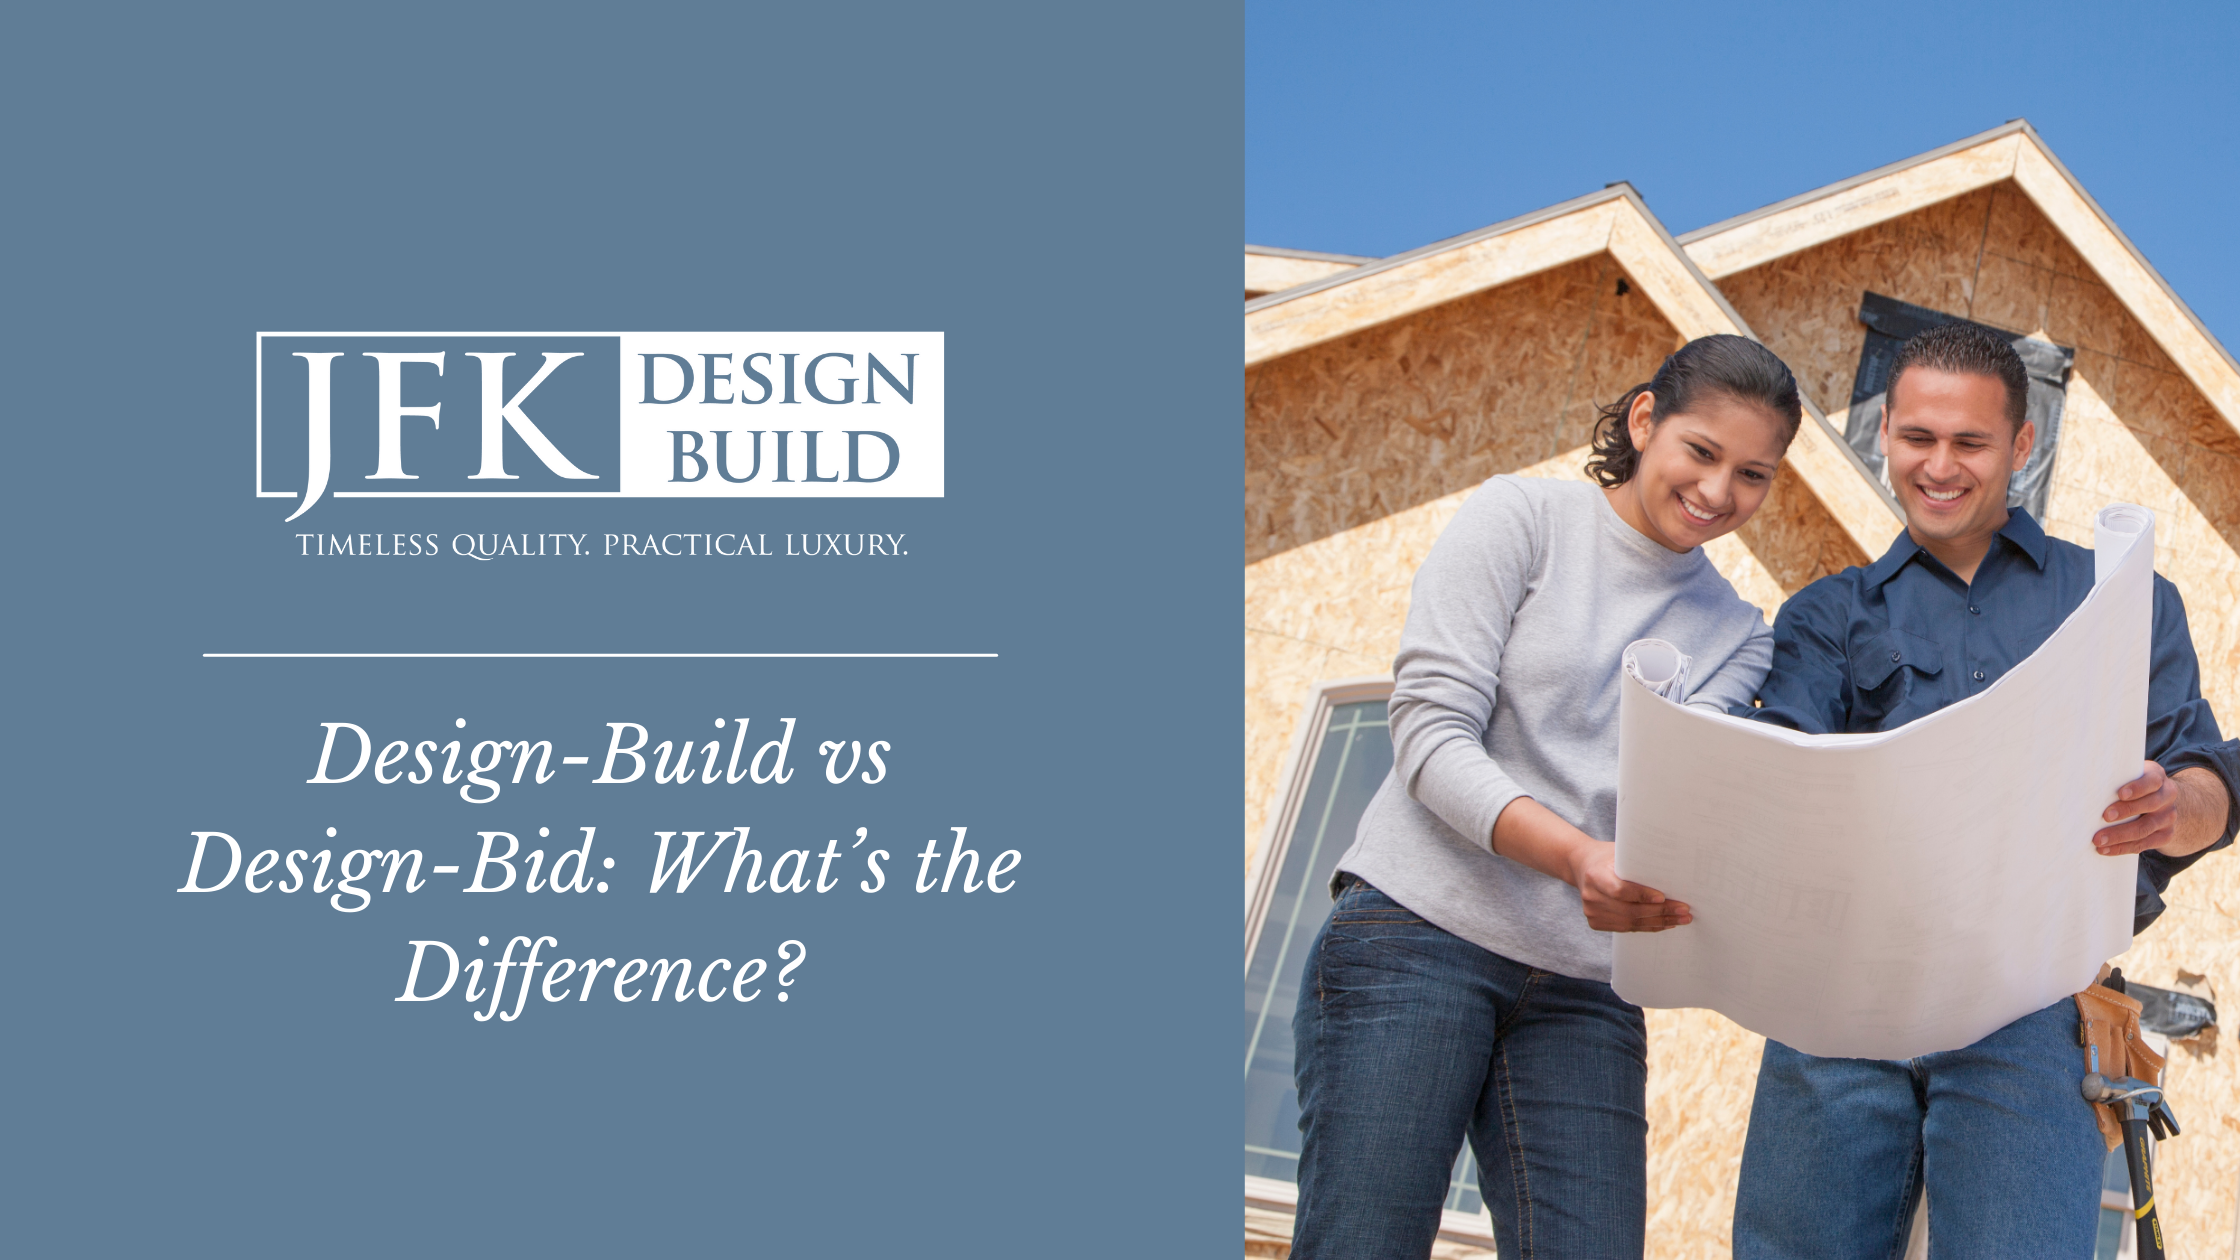 A photo of a couple looking at design plans next to a blue block with white text "Design Build Vs Design-Bid. What's the difference?" and a white JFK Design Build logo